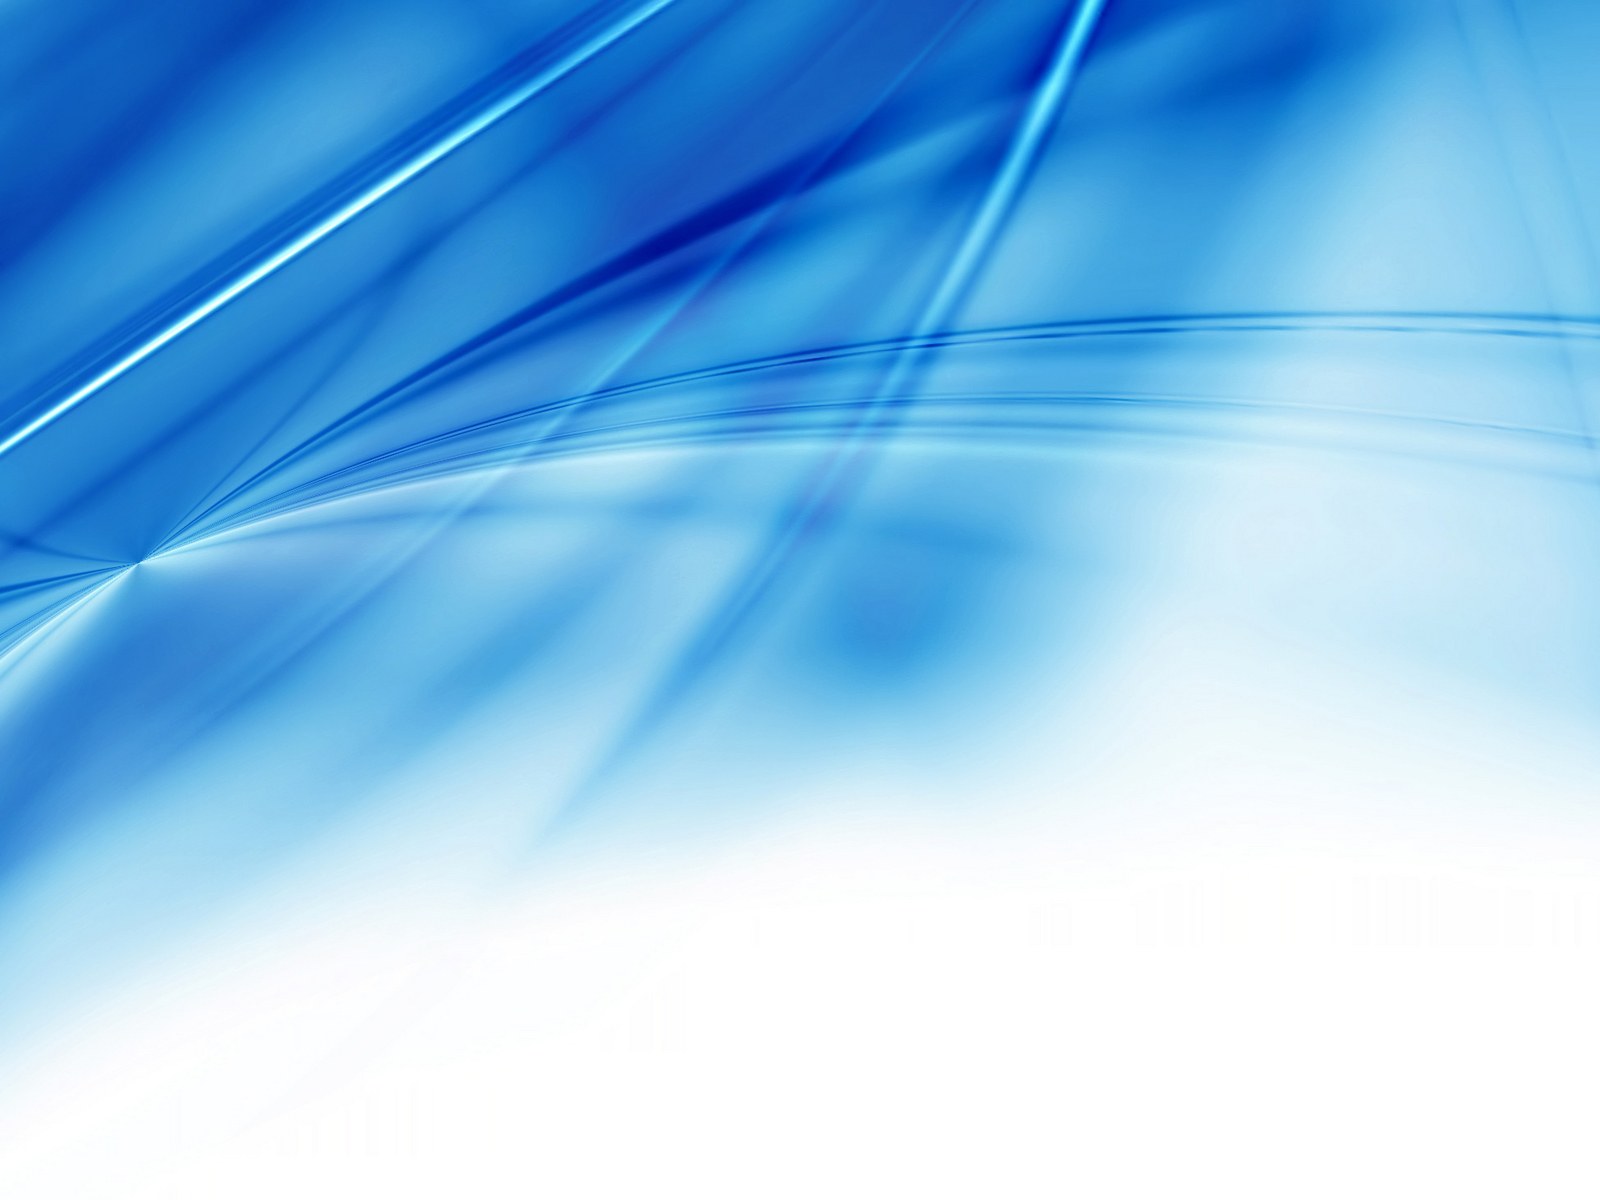 Available Wallpaper Blue Abstract Wallpapers